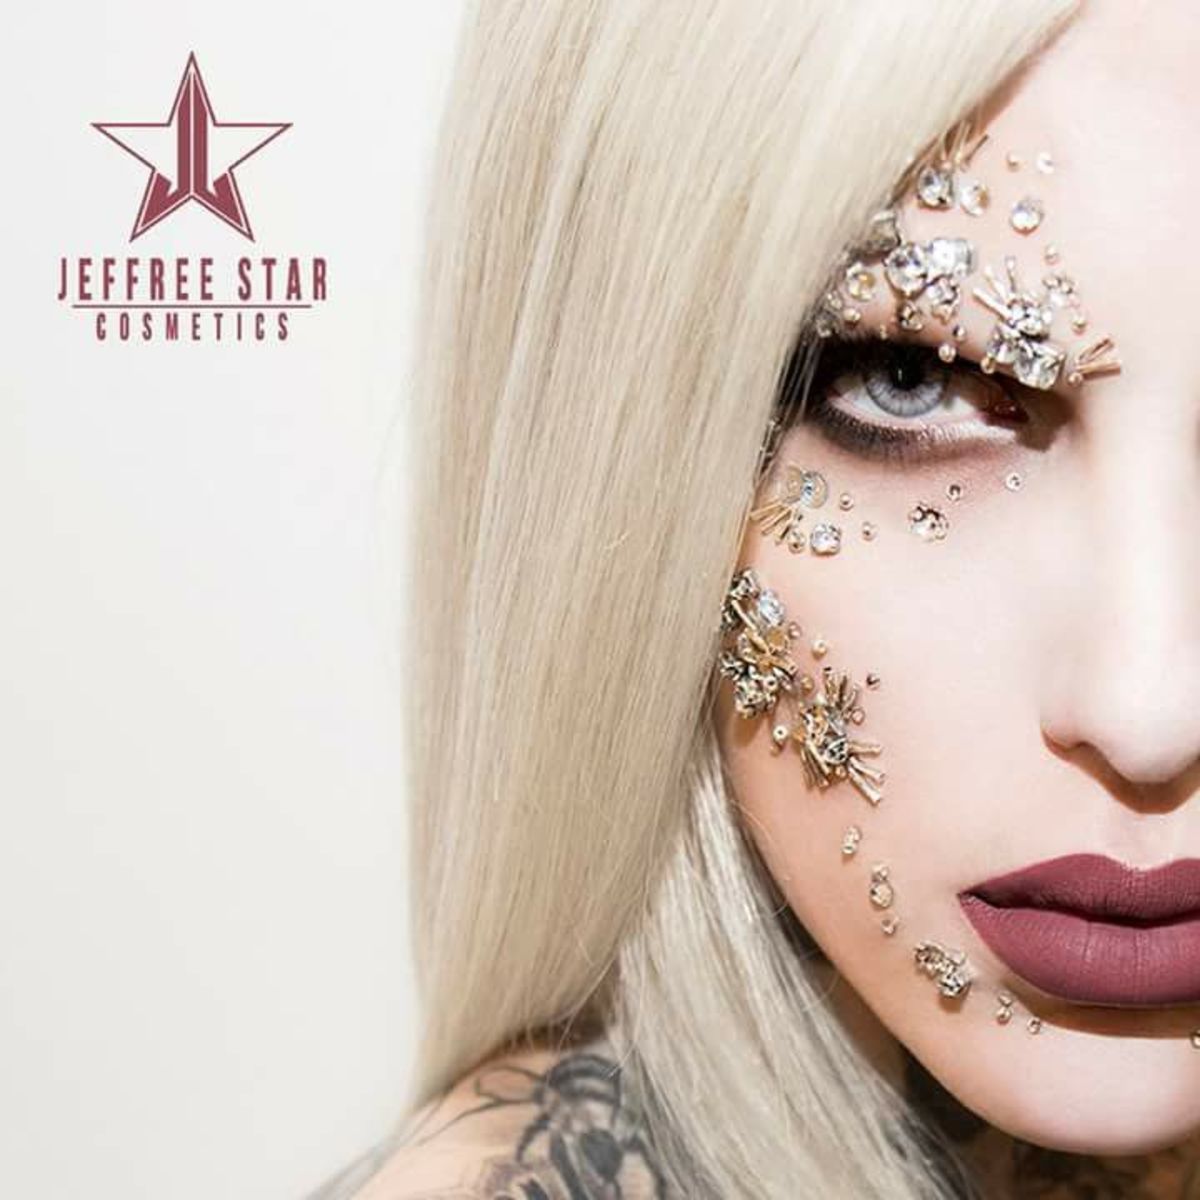 Jeffree Star Cosmetics does not engage in animal testing of its products.